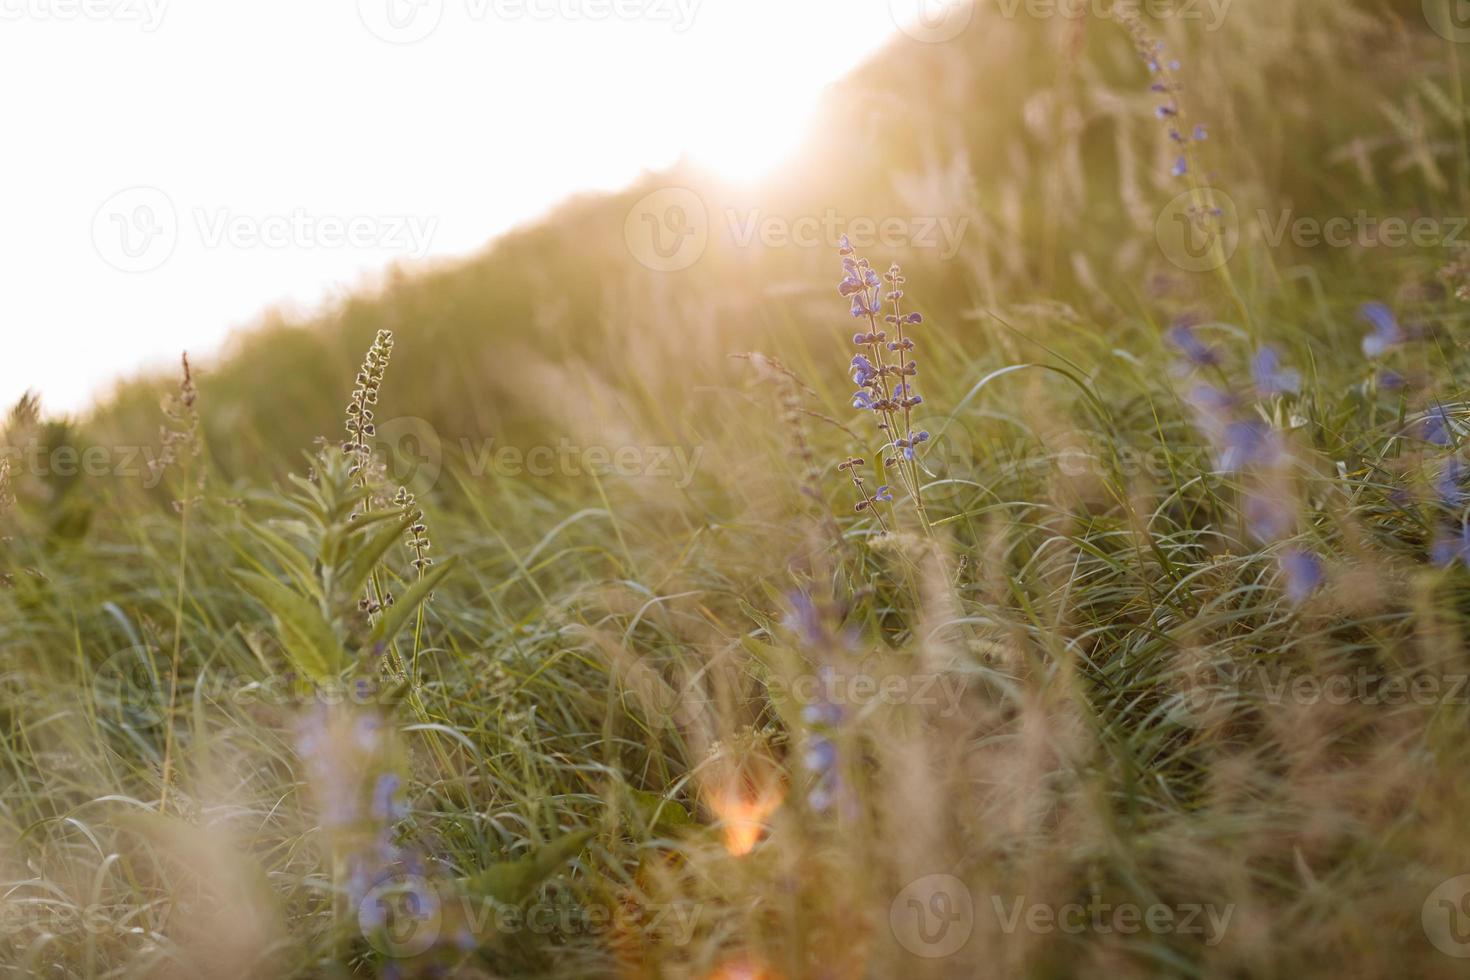 Selective soft focus of dry grass, violet blue vibrant wildflowers, stalks blowing in the wind at golden sunset light, blurred hills on background, copy space. Nature, summer, grass concept photo